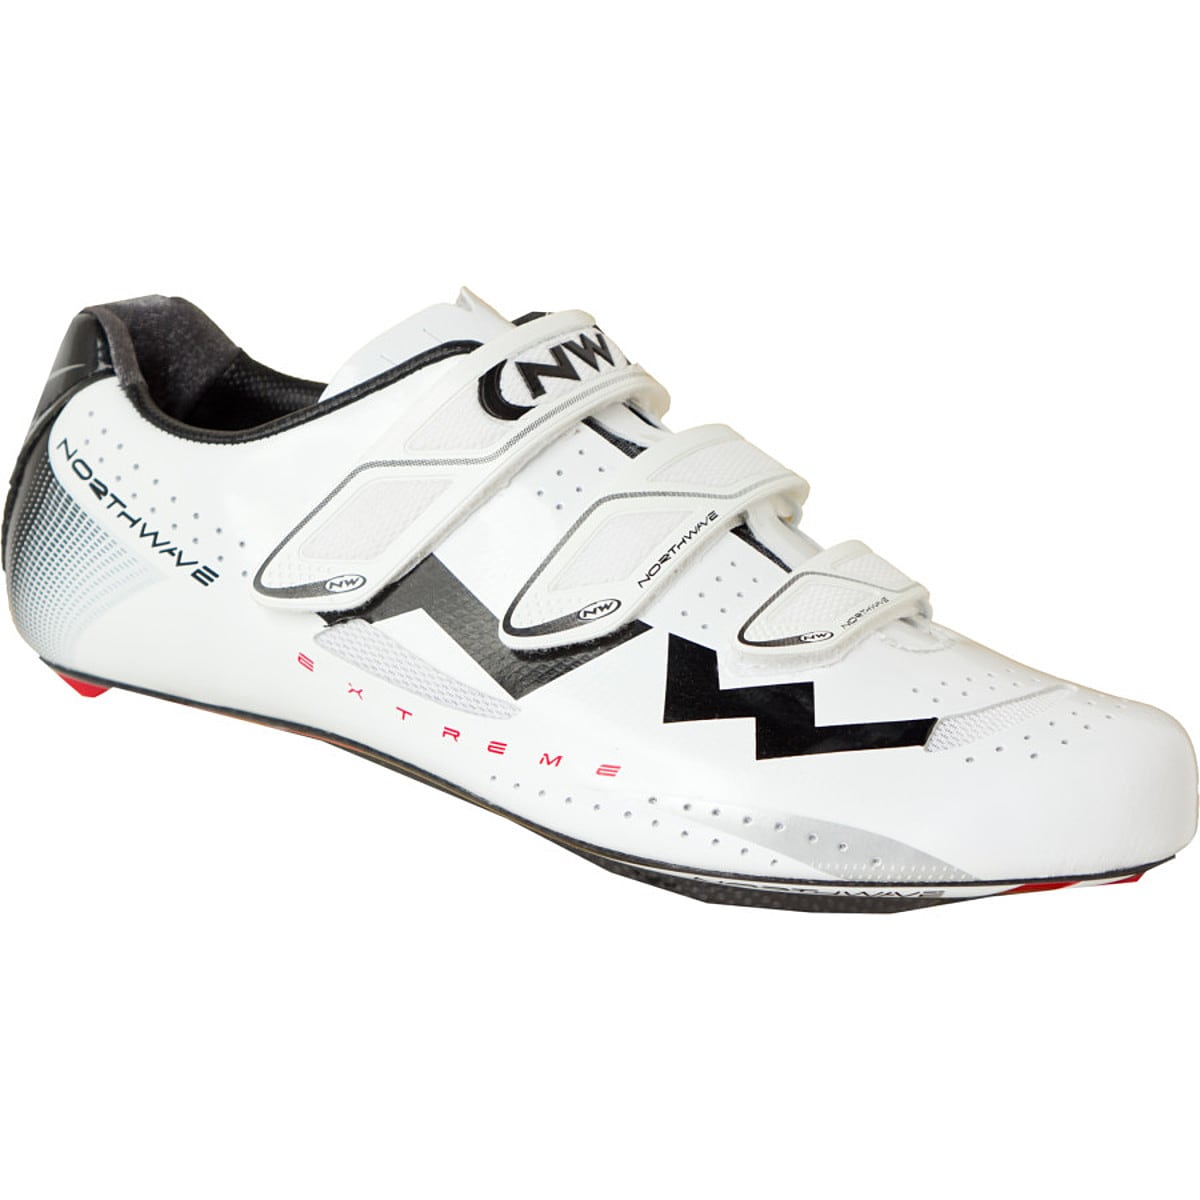 Northwave Extreme Shoes Men's